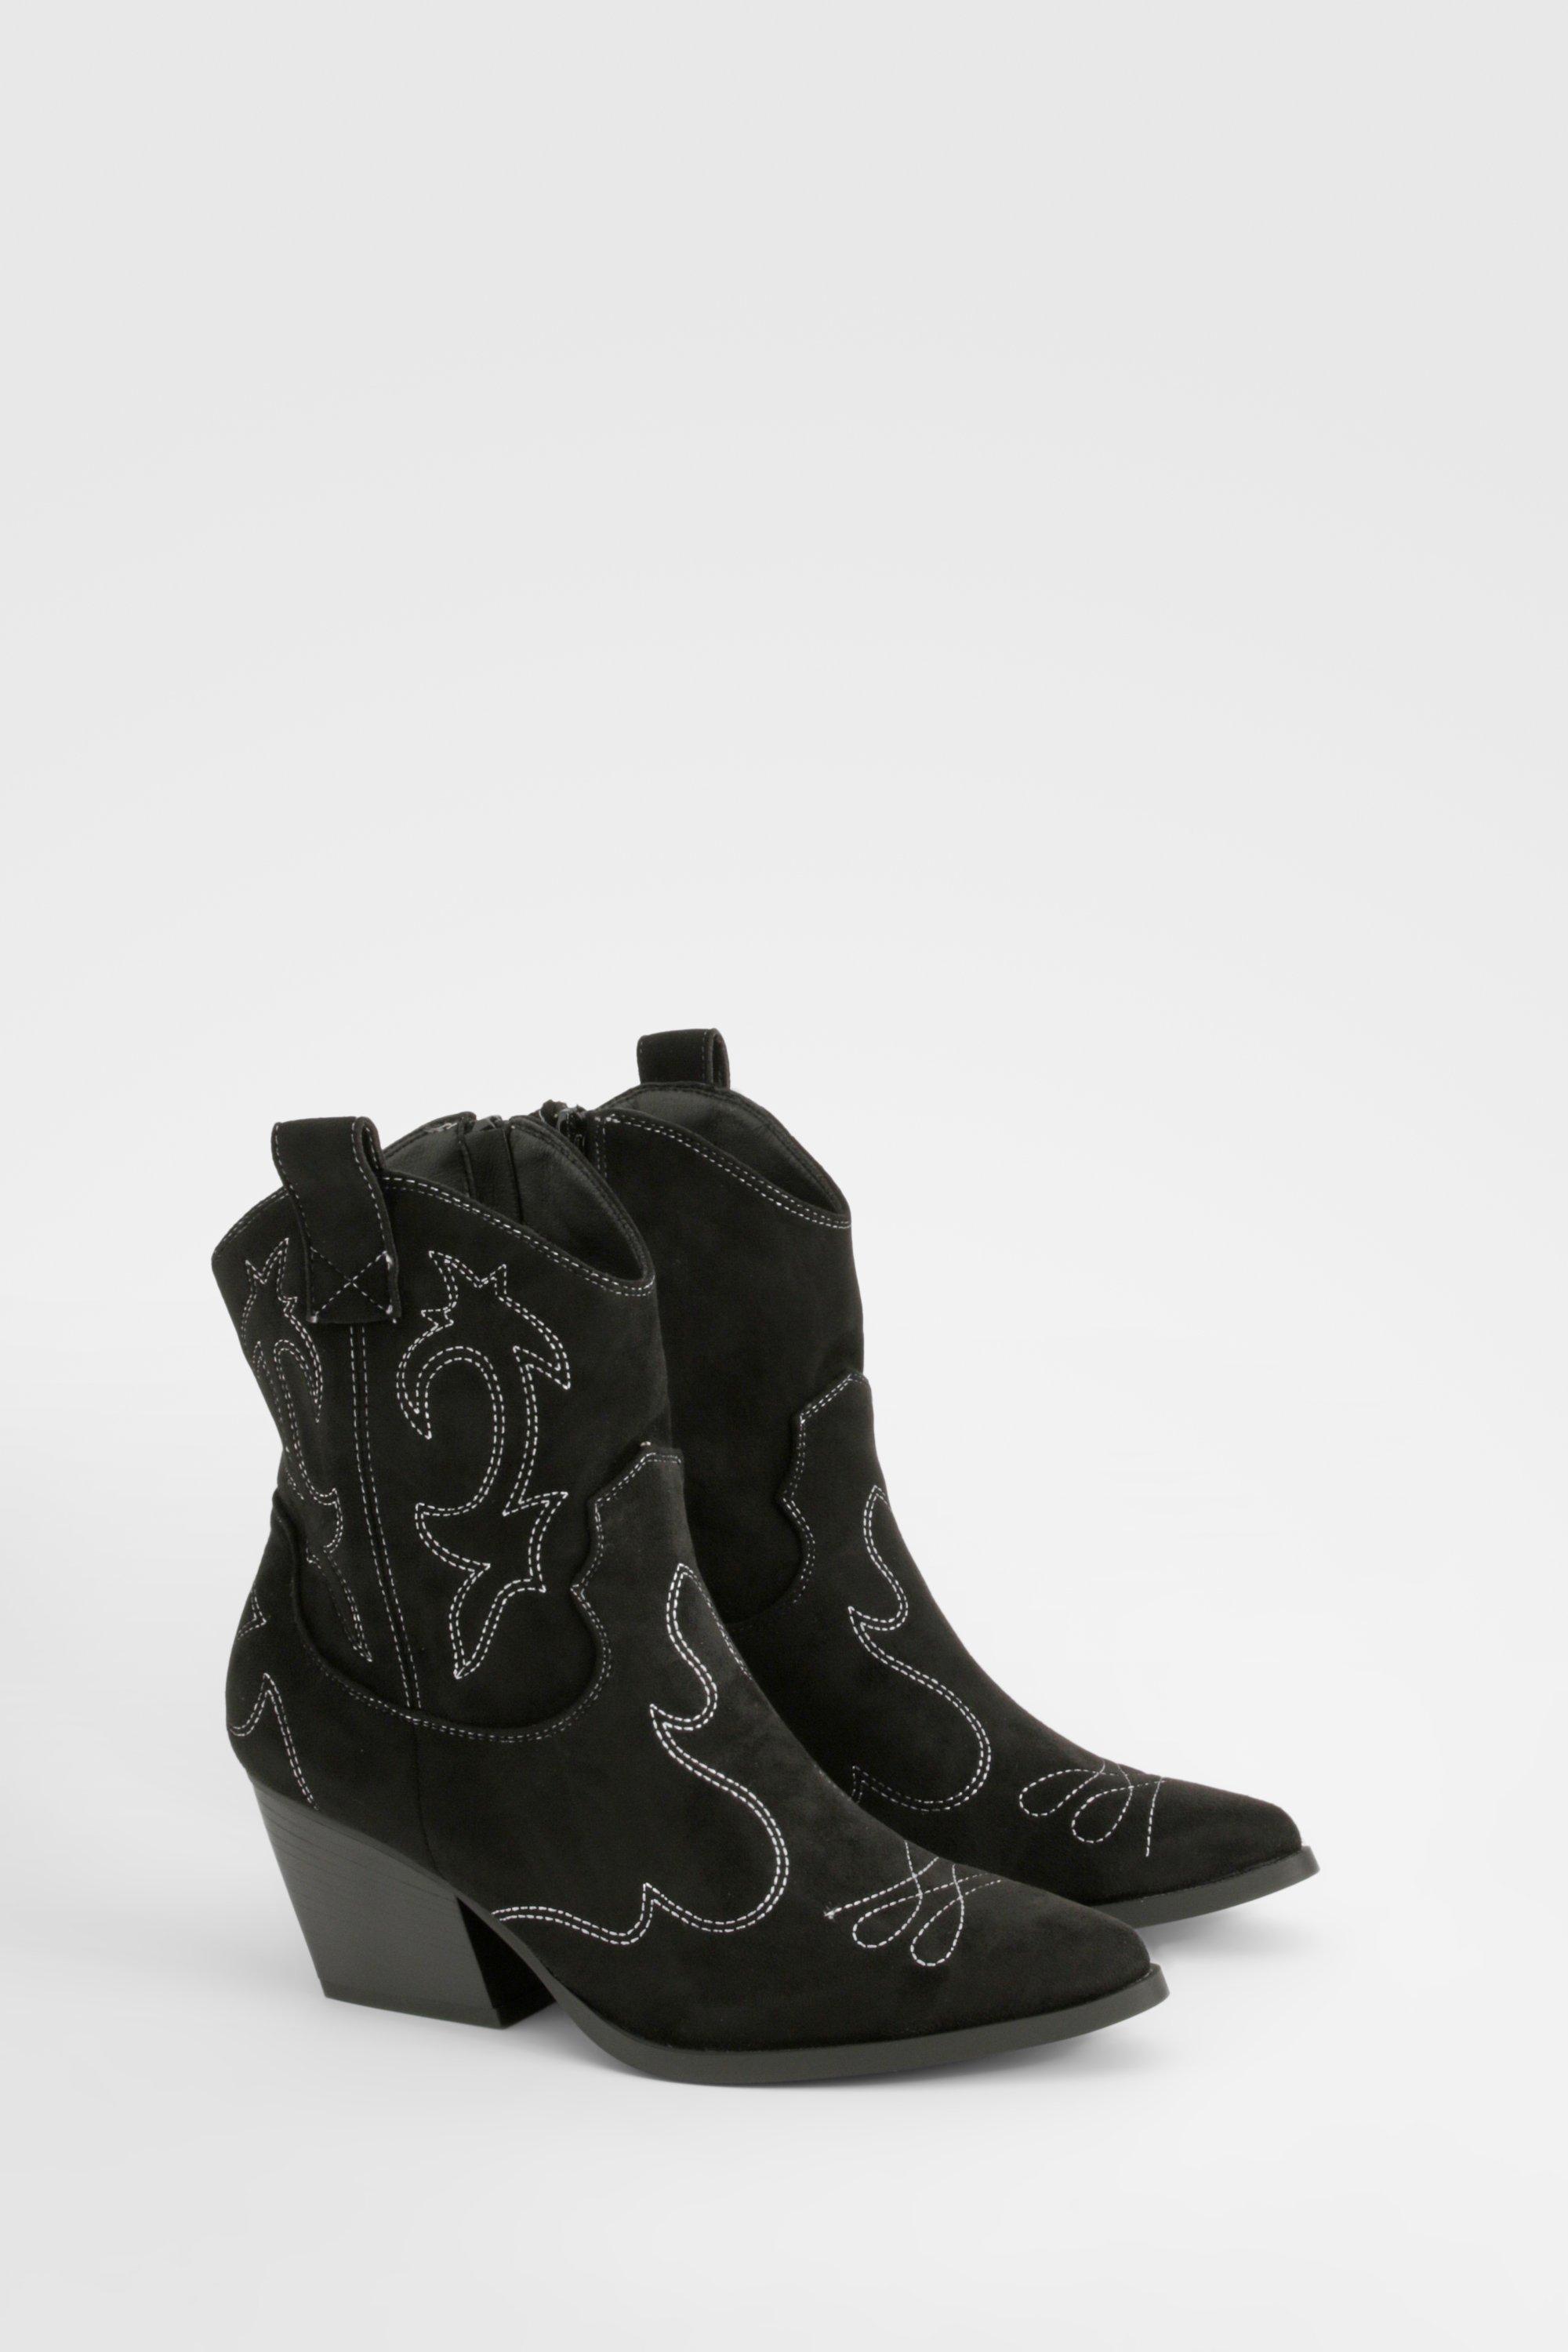 Boohoo Stitch Detail Western Ankle Boots, Black